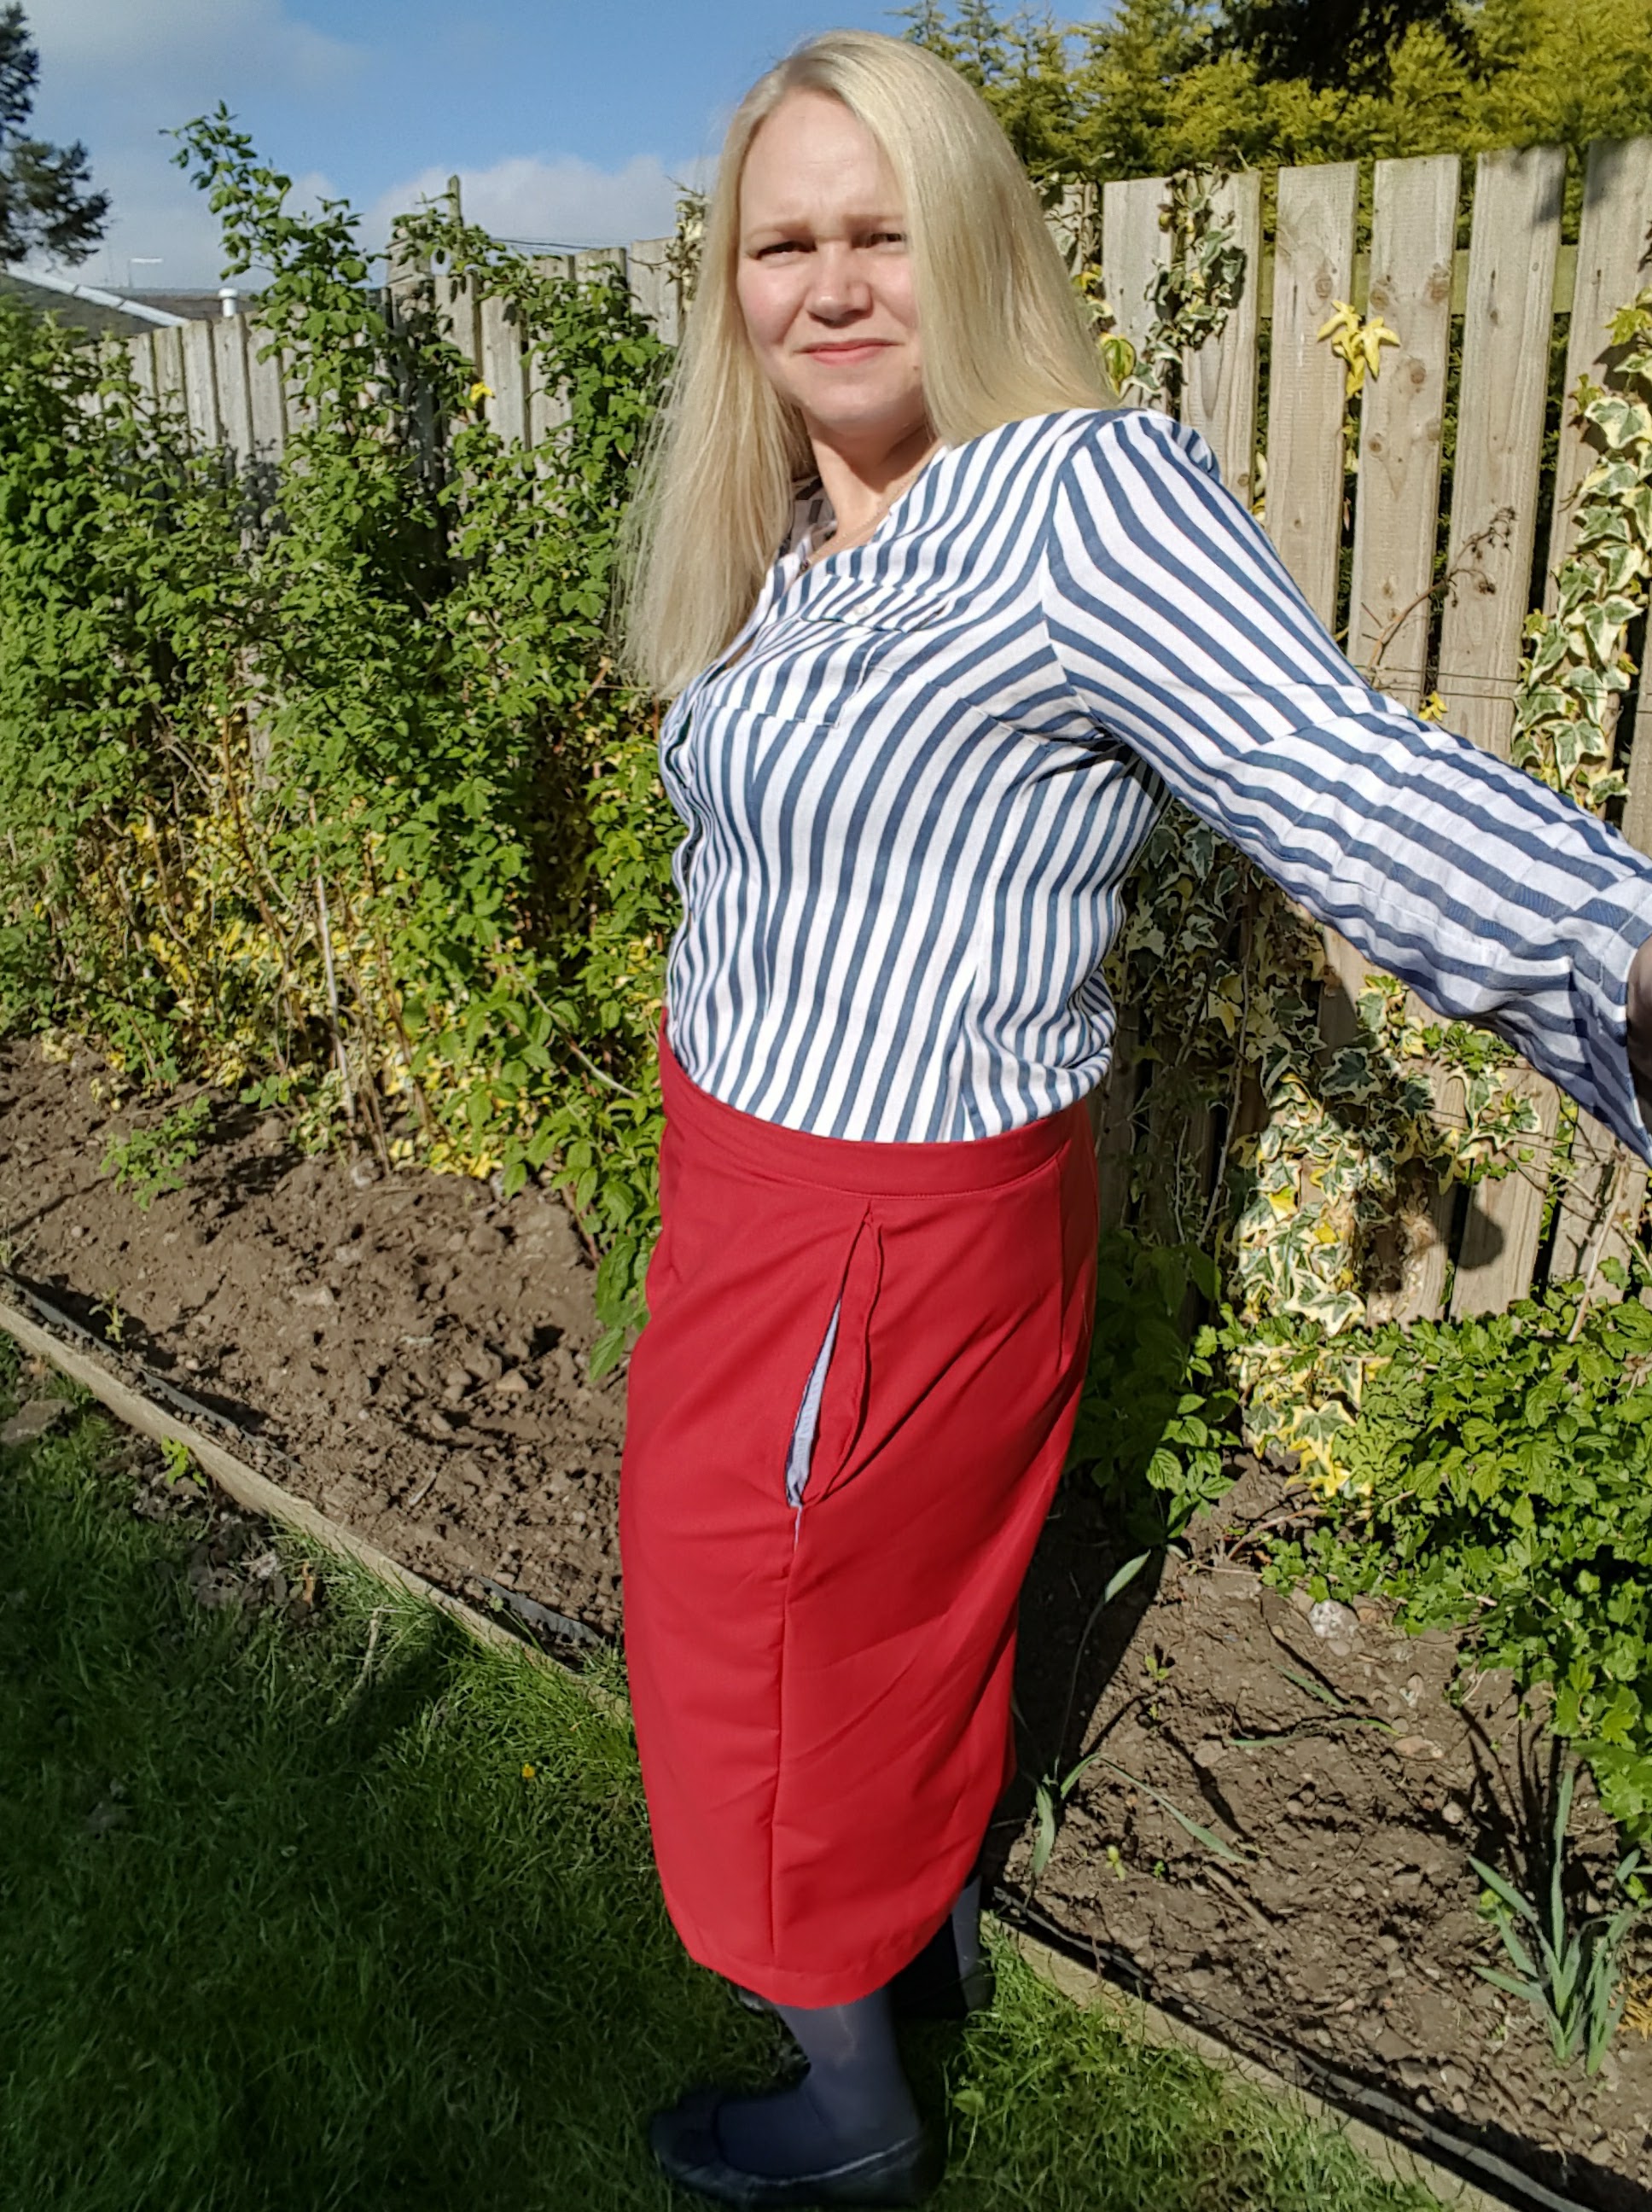 Culottes hell to joy! – Sew sleep deprived